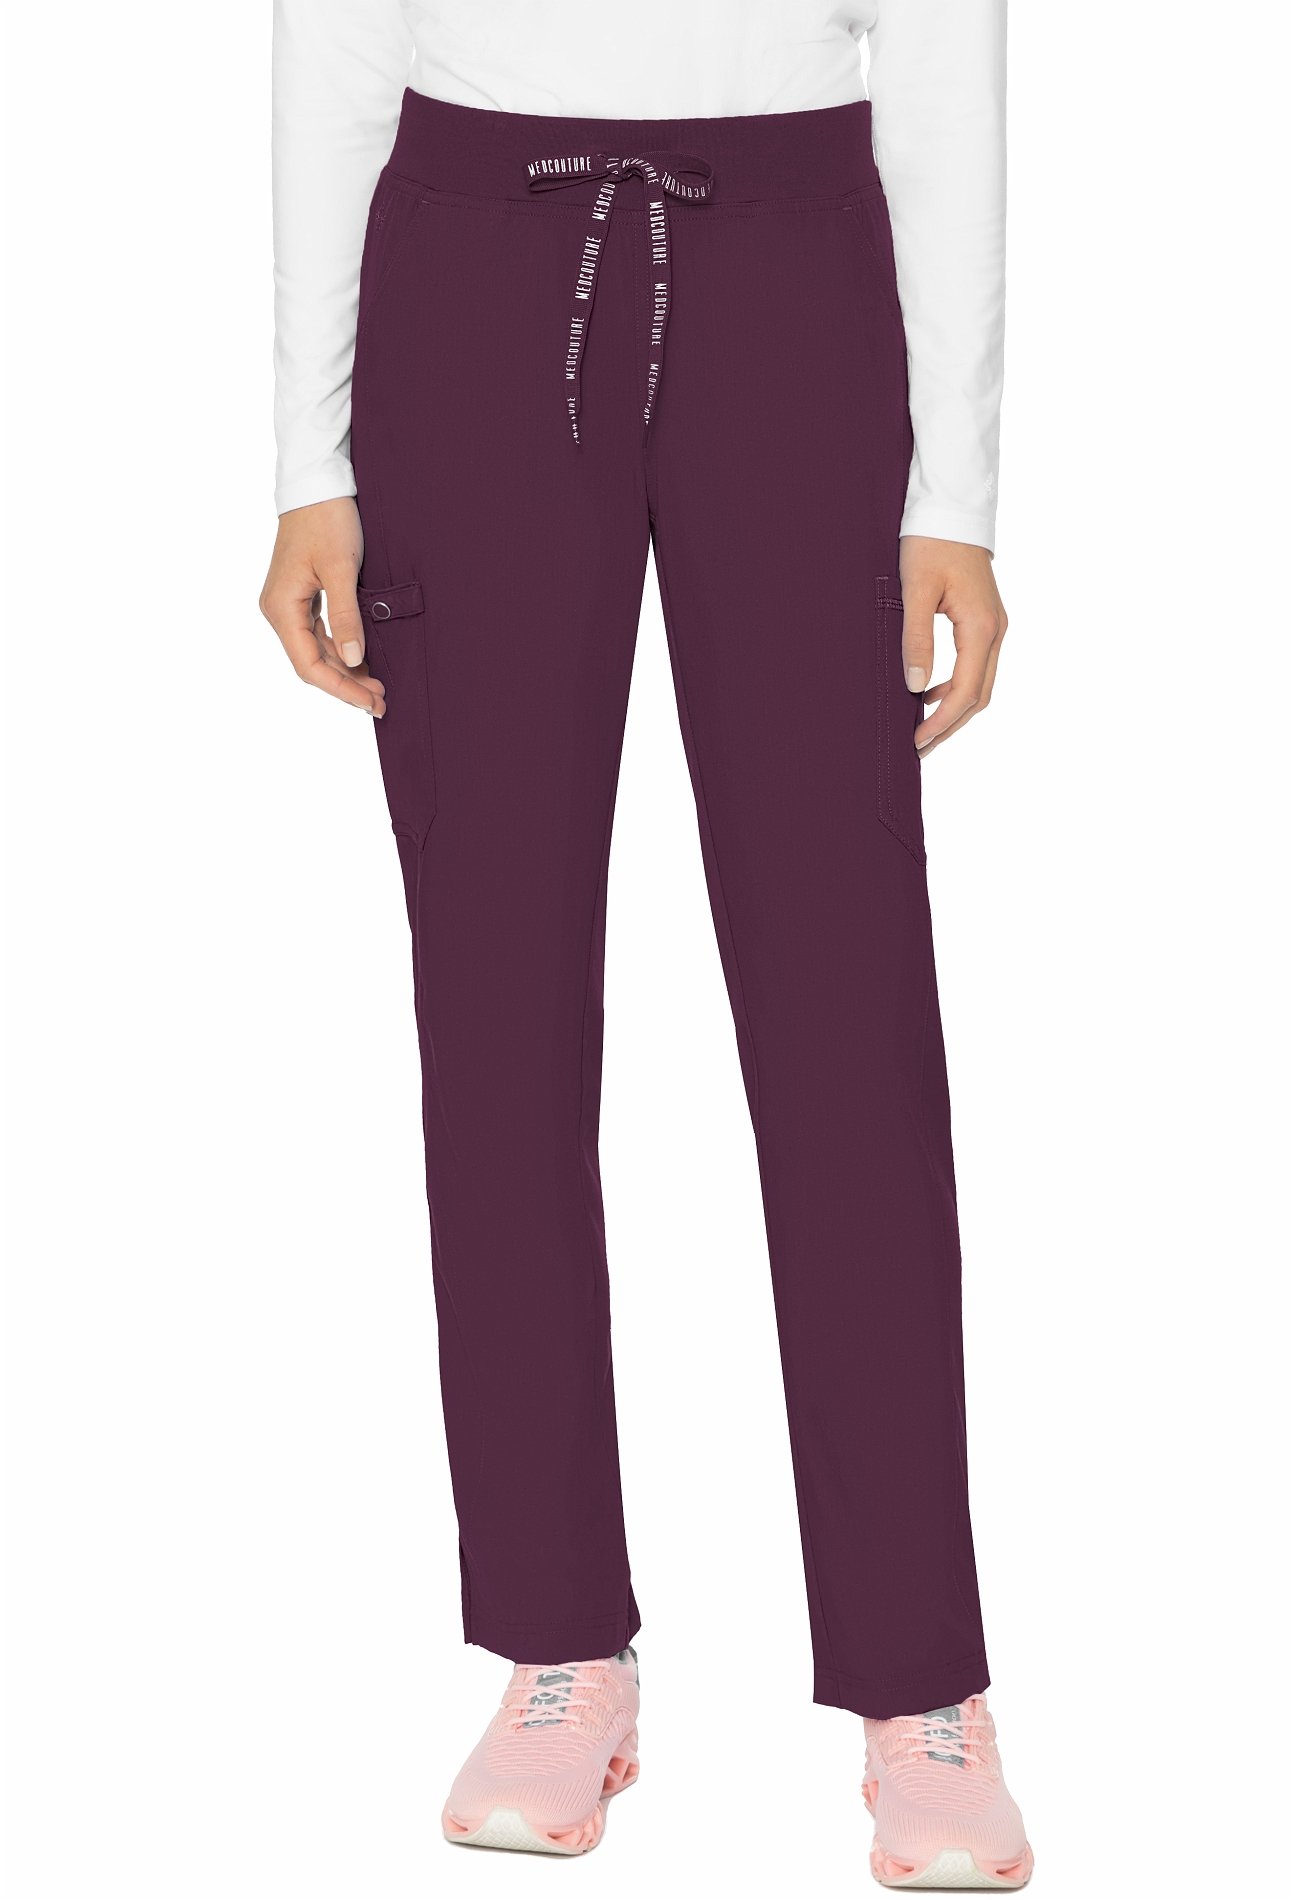  Med Couture Women's 'Yoga Pant' Scrub Bottoms